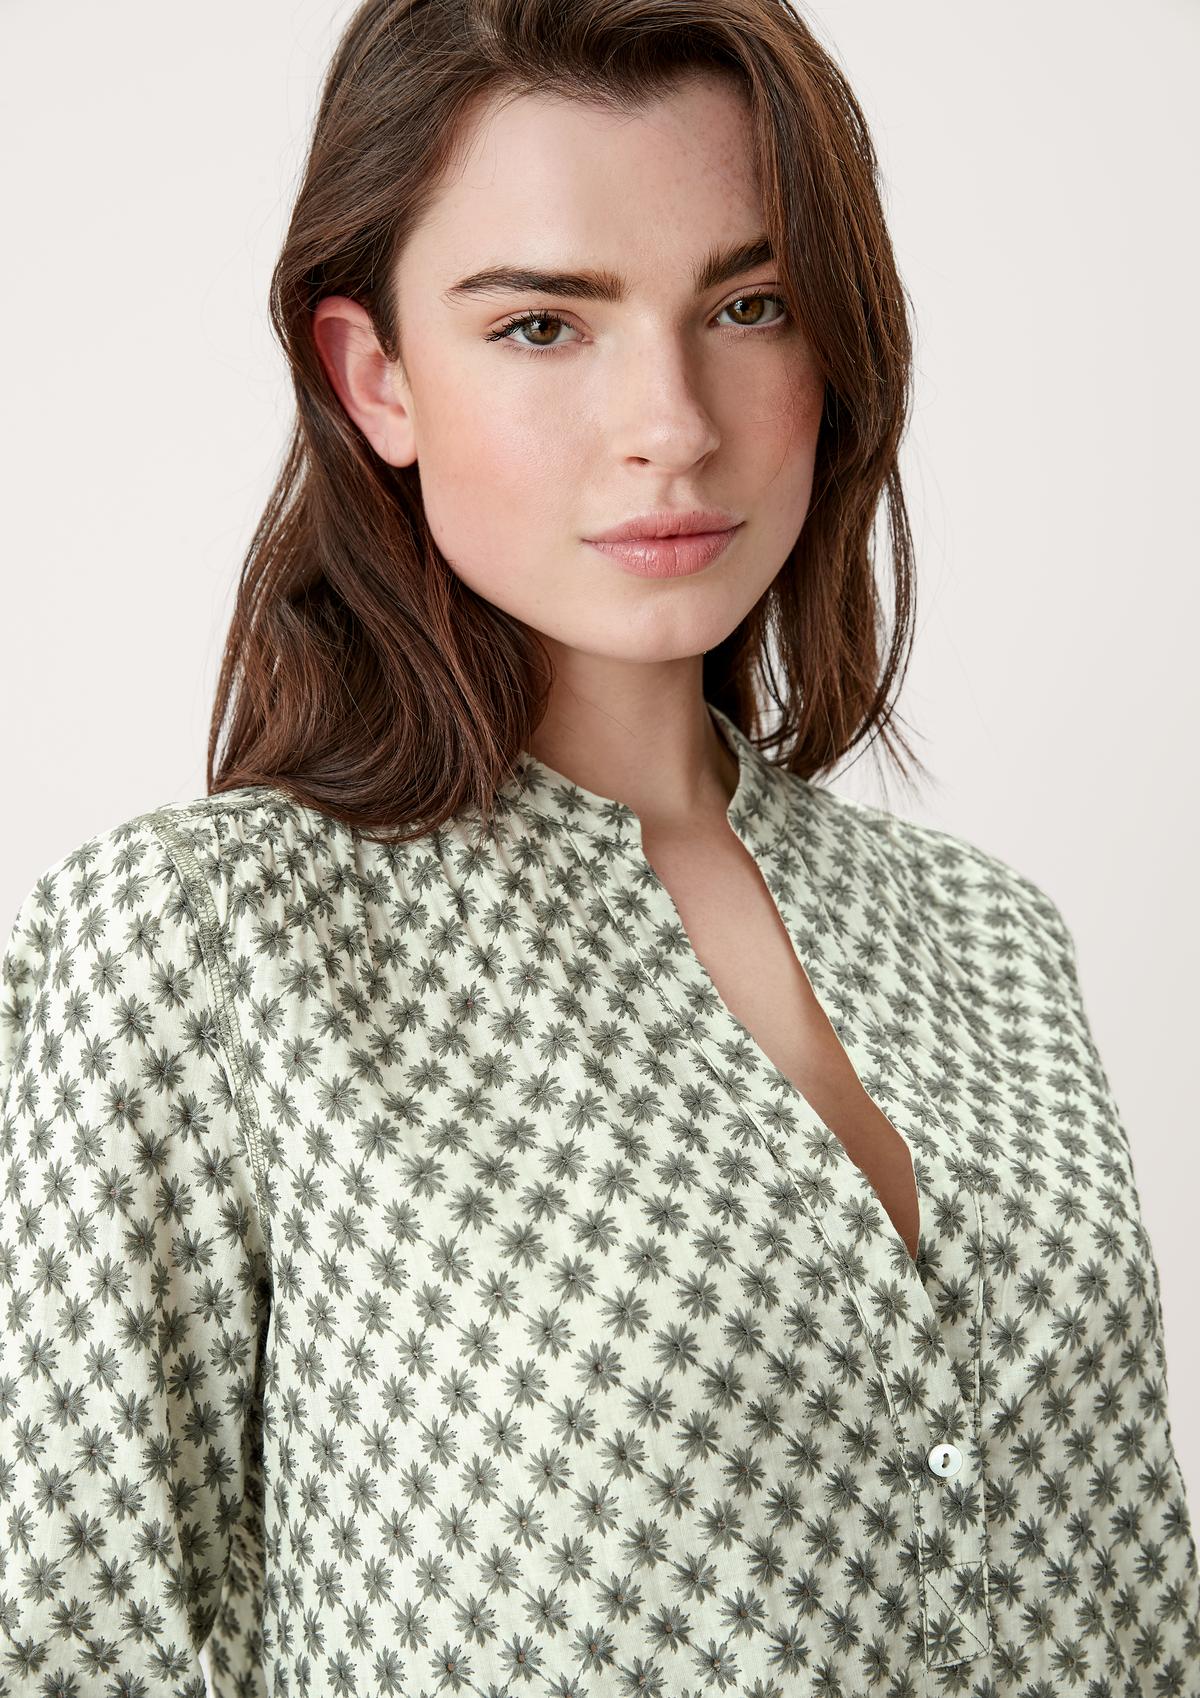 s.Oliver Slip-on blouse with floral embroidery